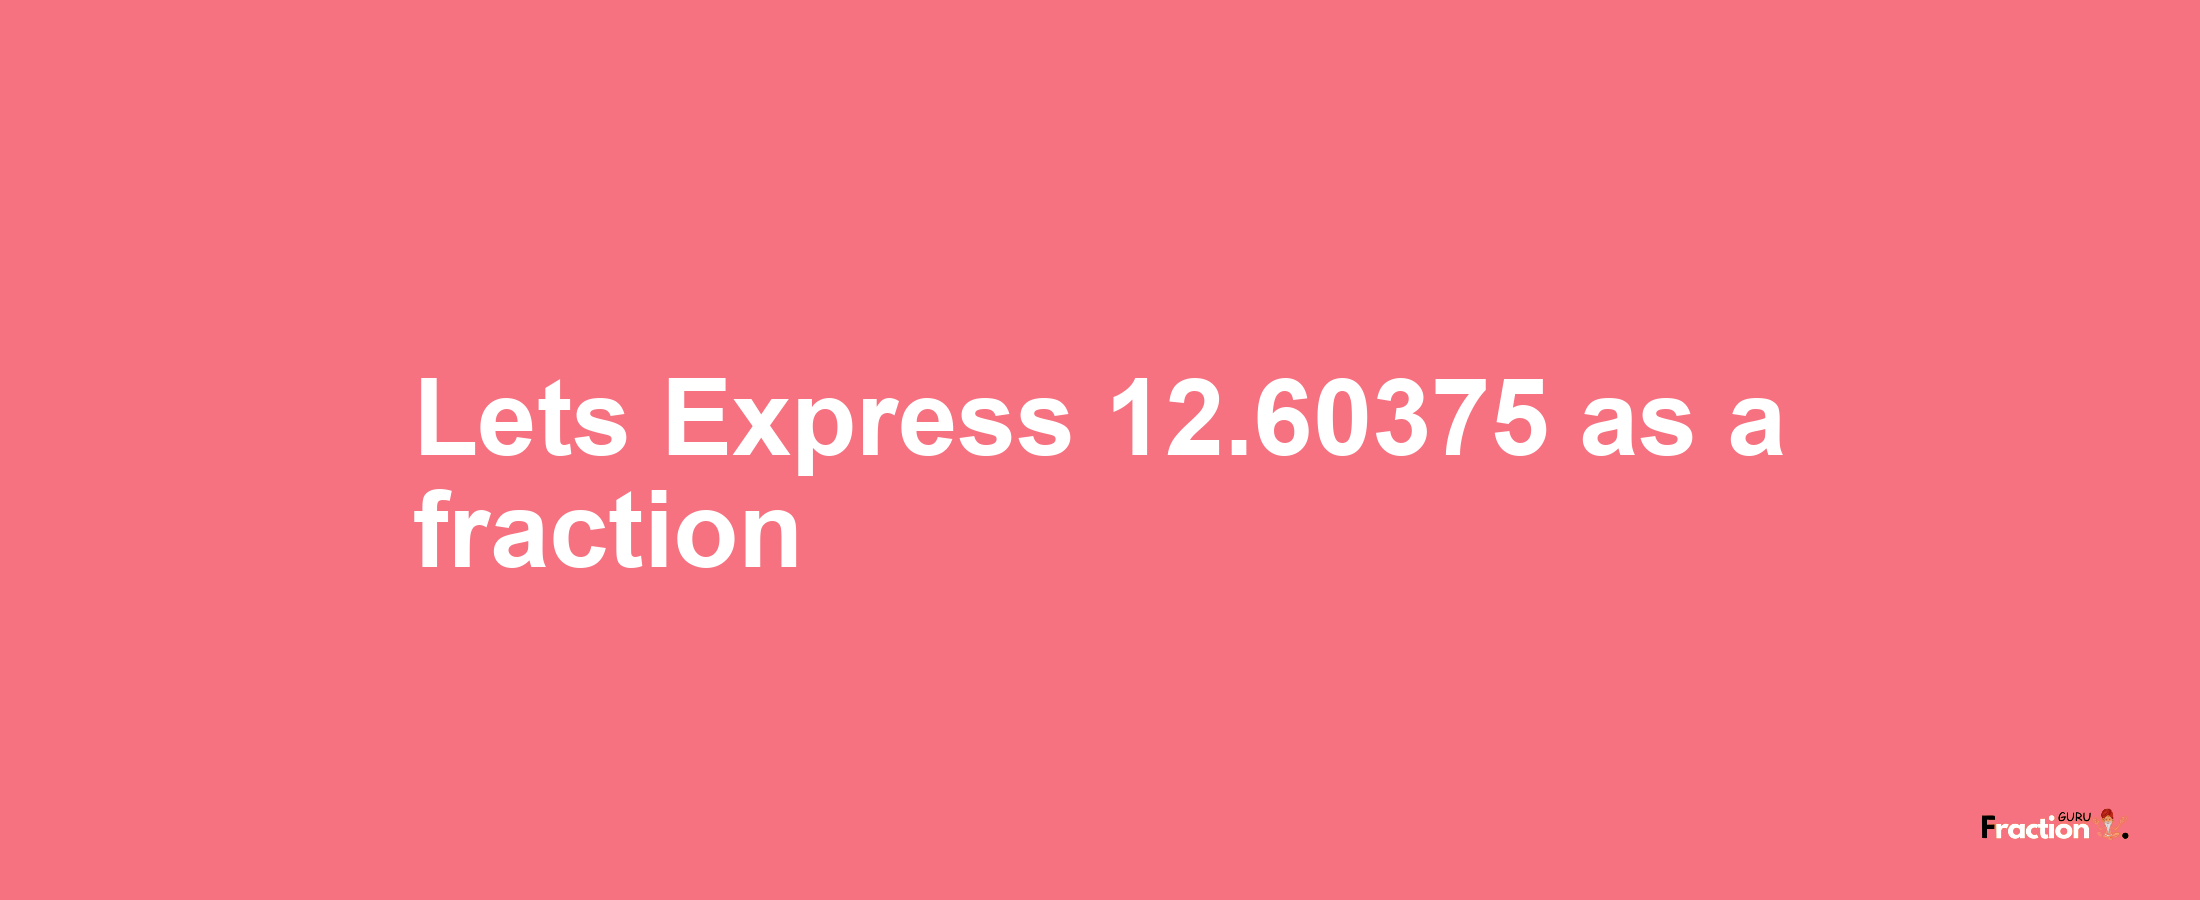 Lets Express 12.60375 as afraction